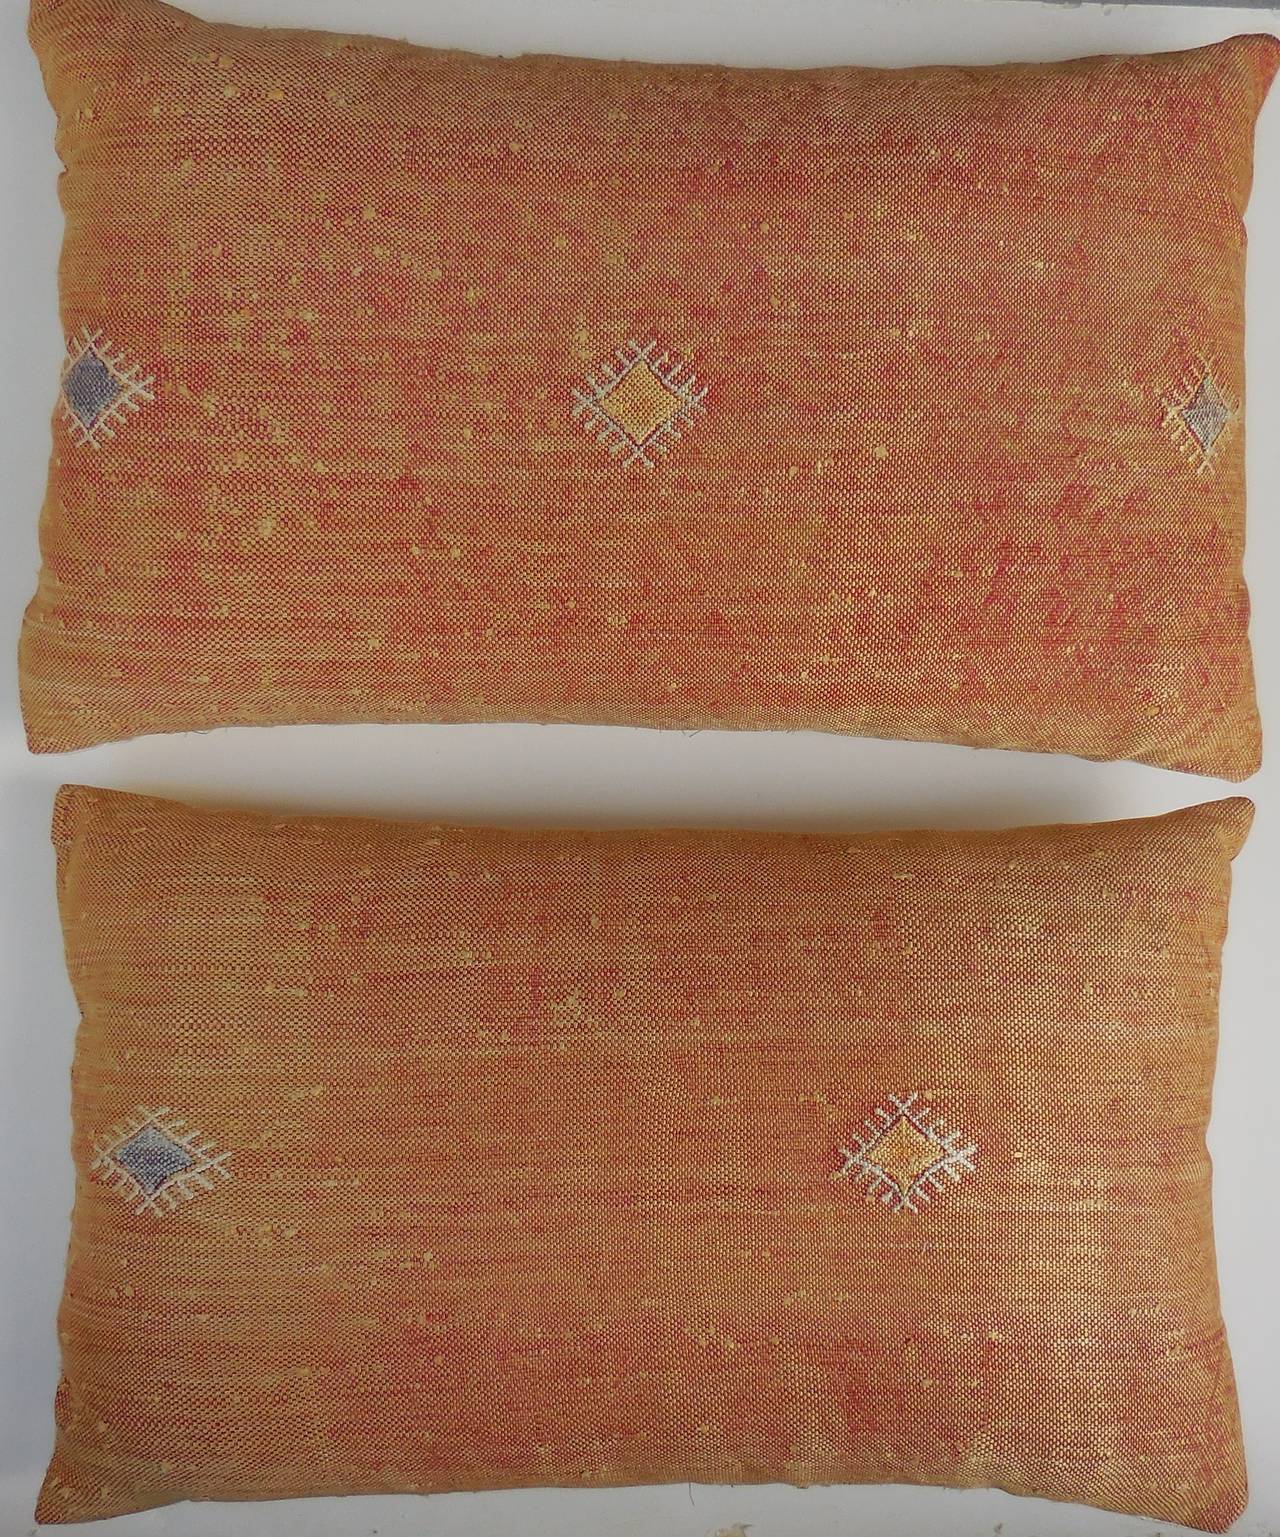 Beautiful pair of pillows made of handwoven rug fragment, with geometric motif
and unusual muted orange color.
New insert. 
Silk backing.